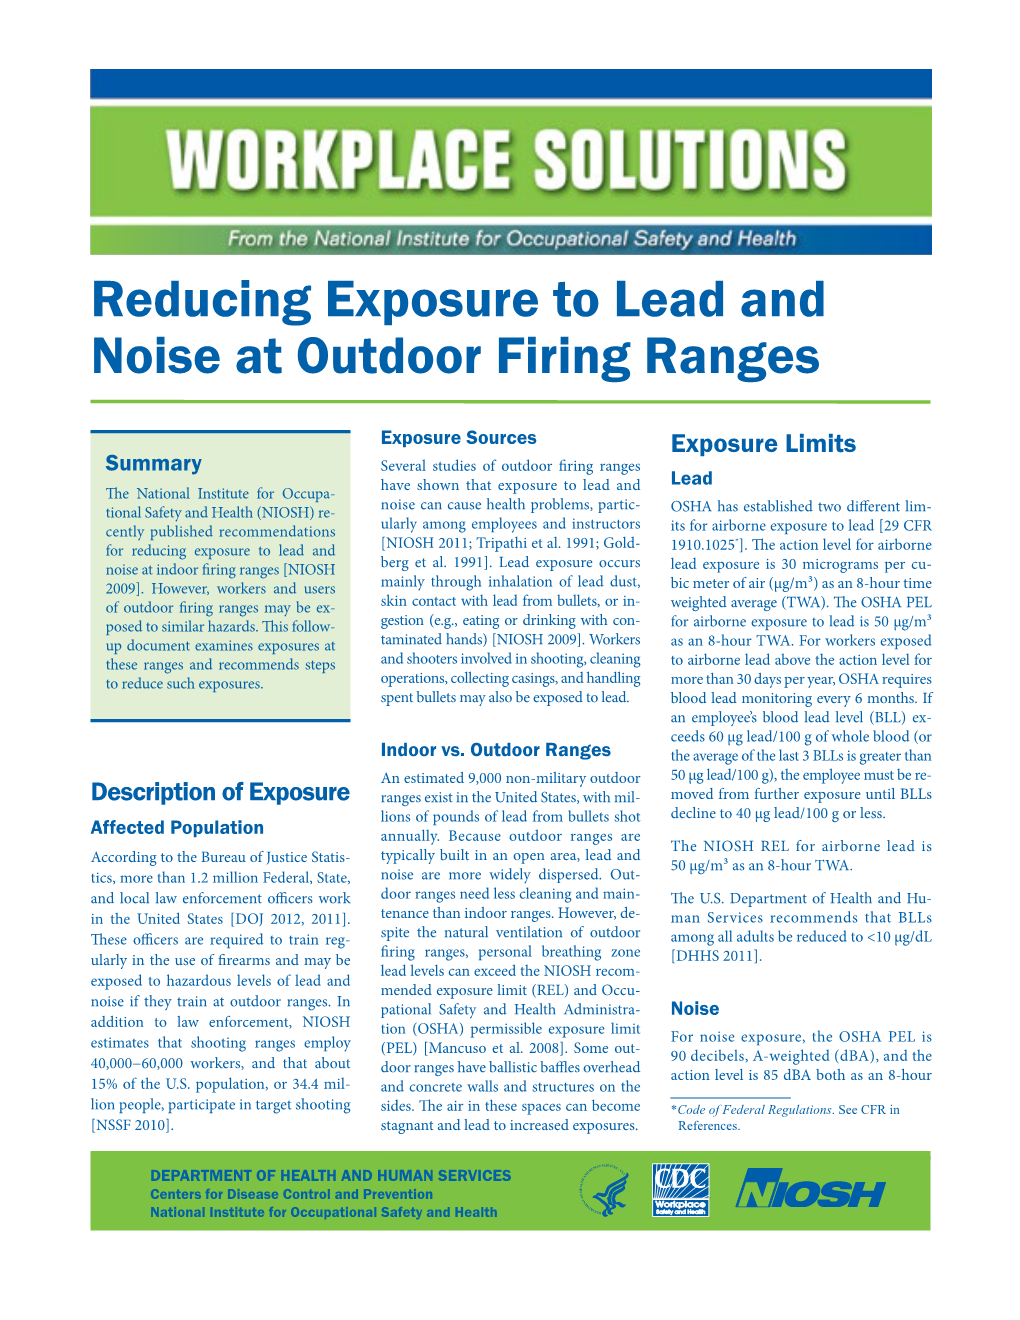 Reducing Exposure to Lead and Noise at Outdoor Firing Ranges